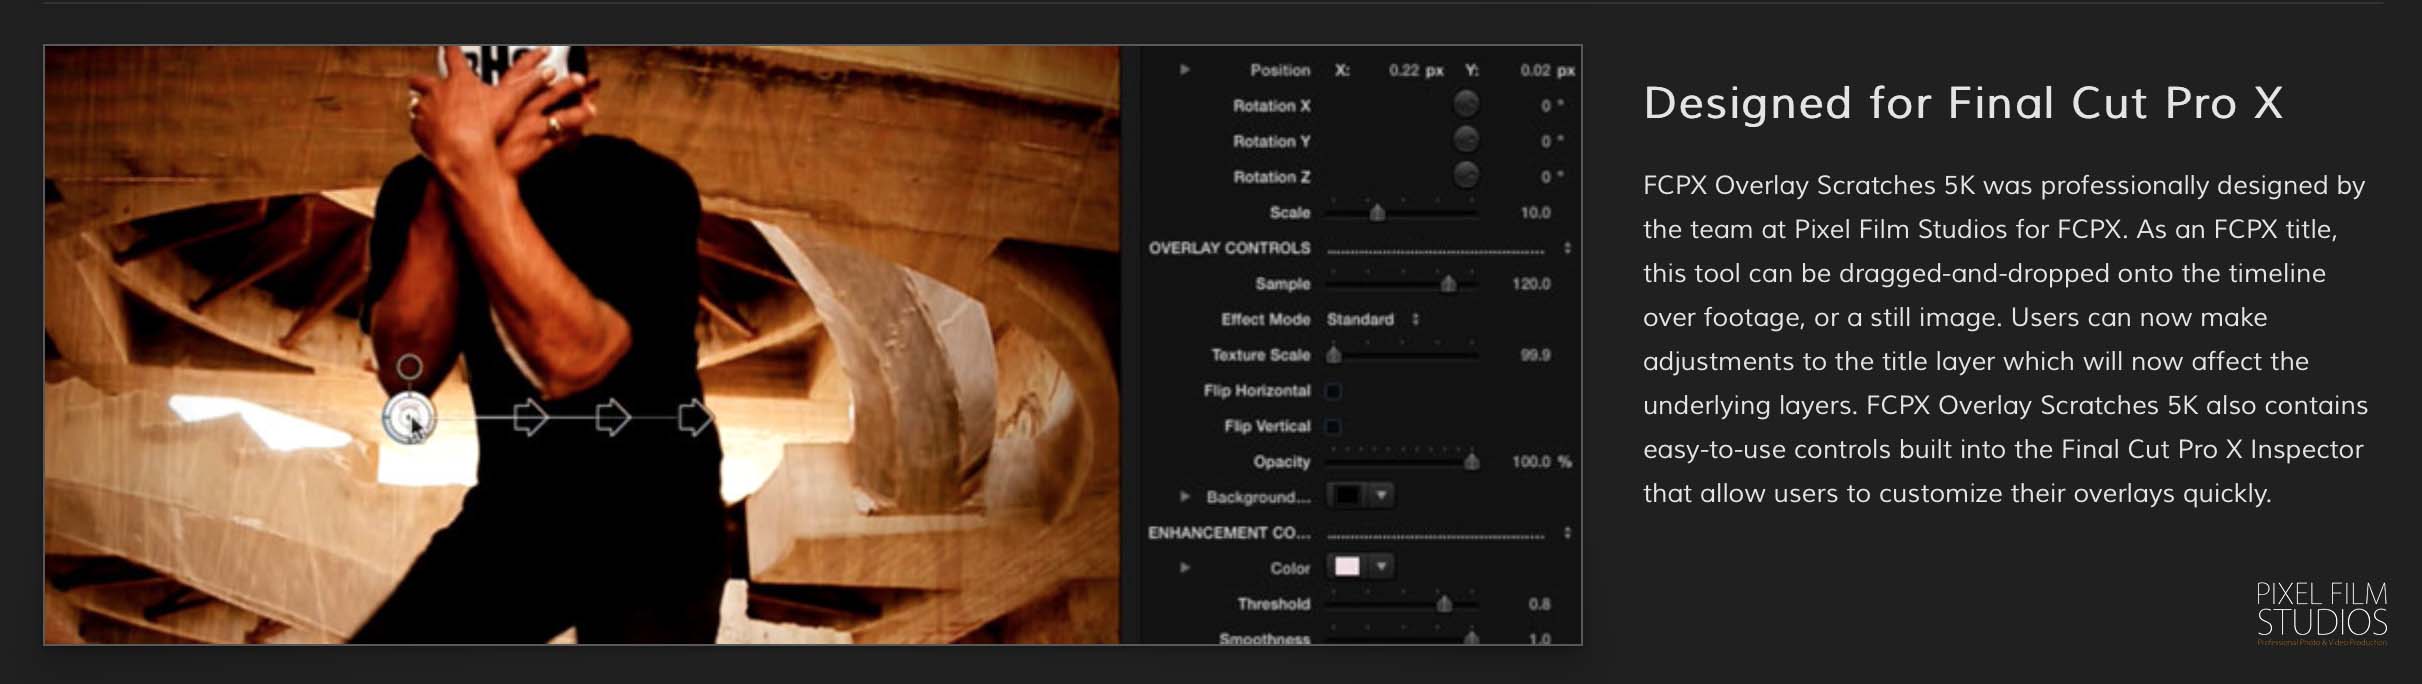 FCPX Overly Scratches 5k for Final Cut Pro X from Pixel Film Studios